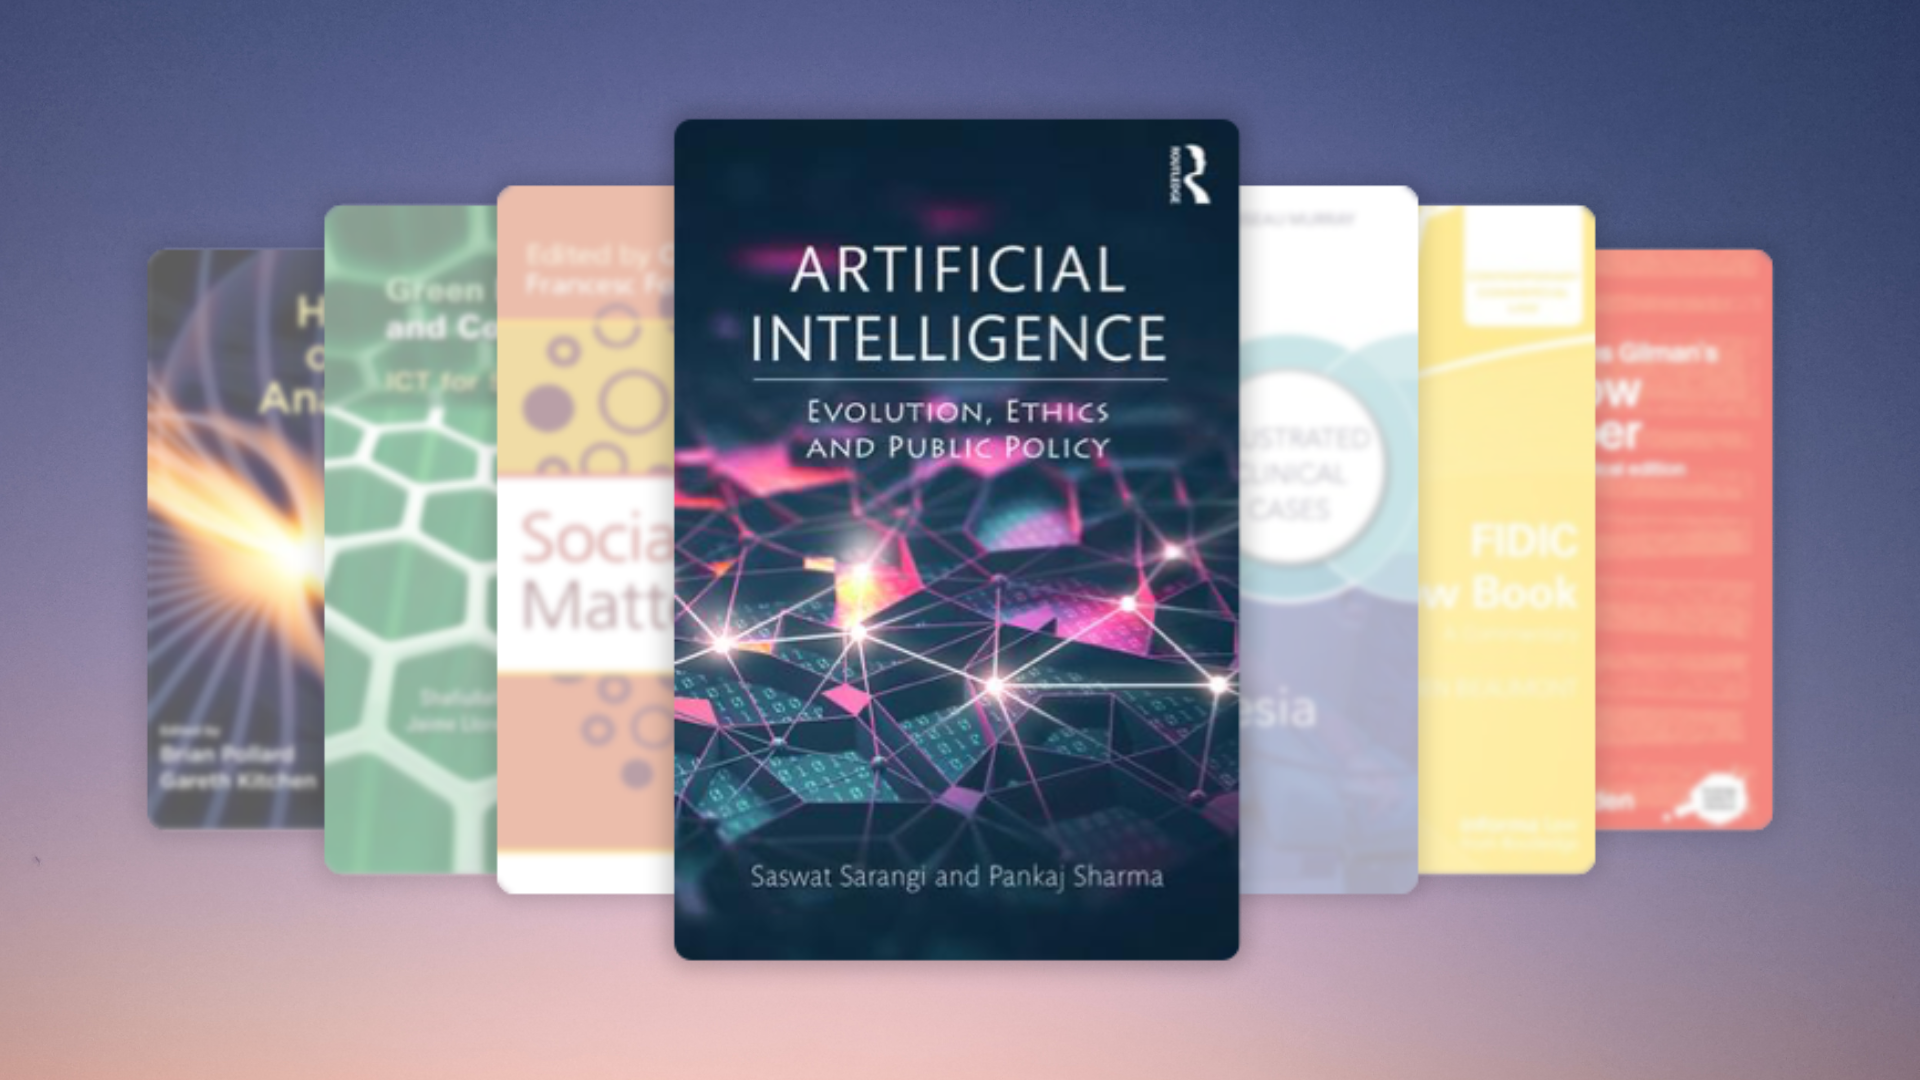 books cover lined up together, introducing AI and Machine learning collection